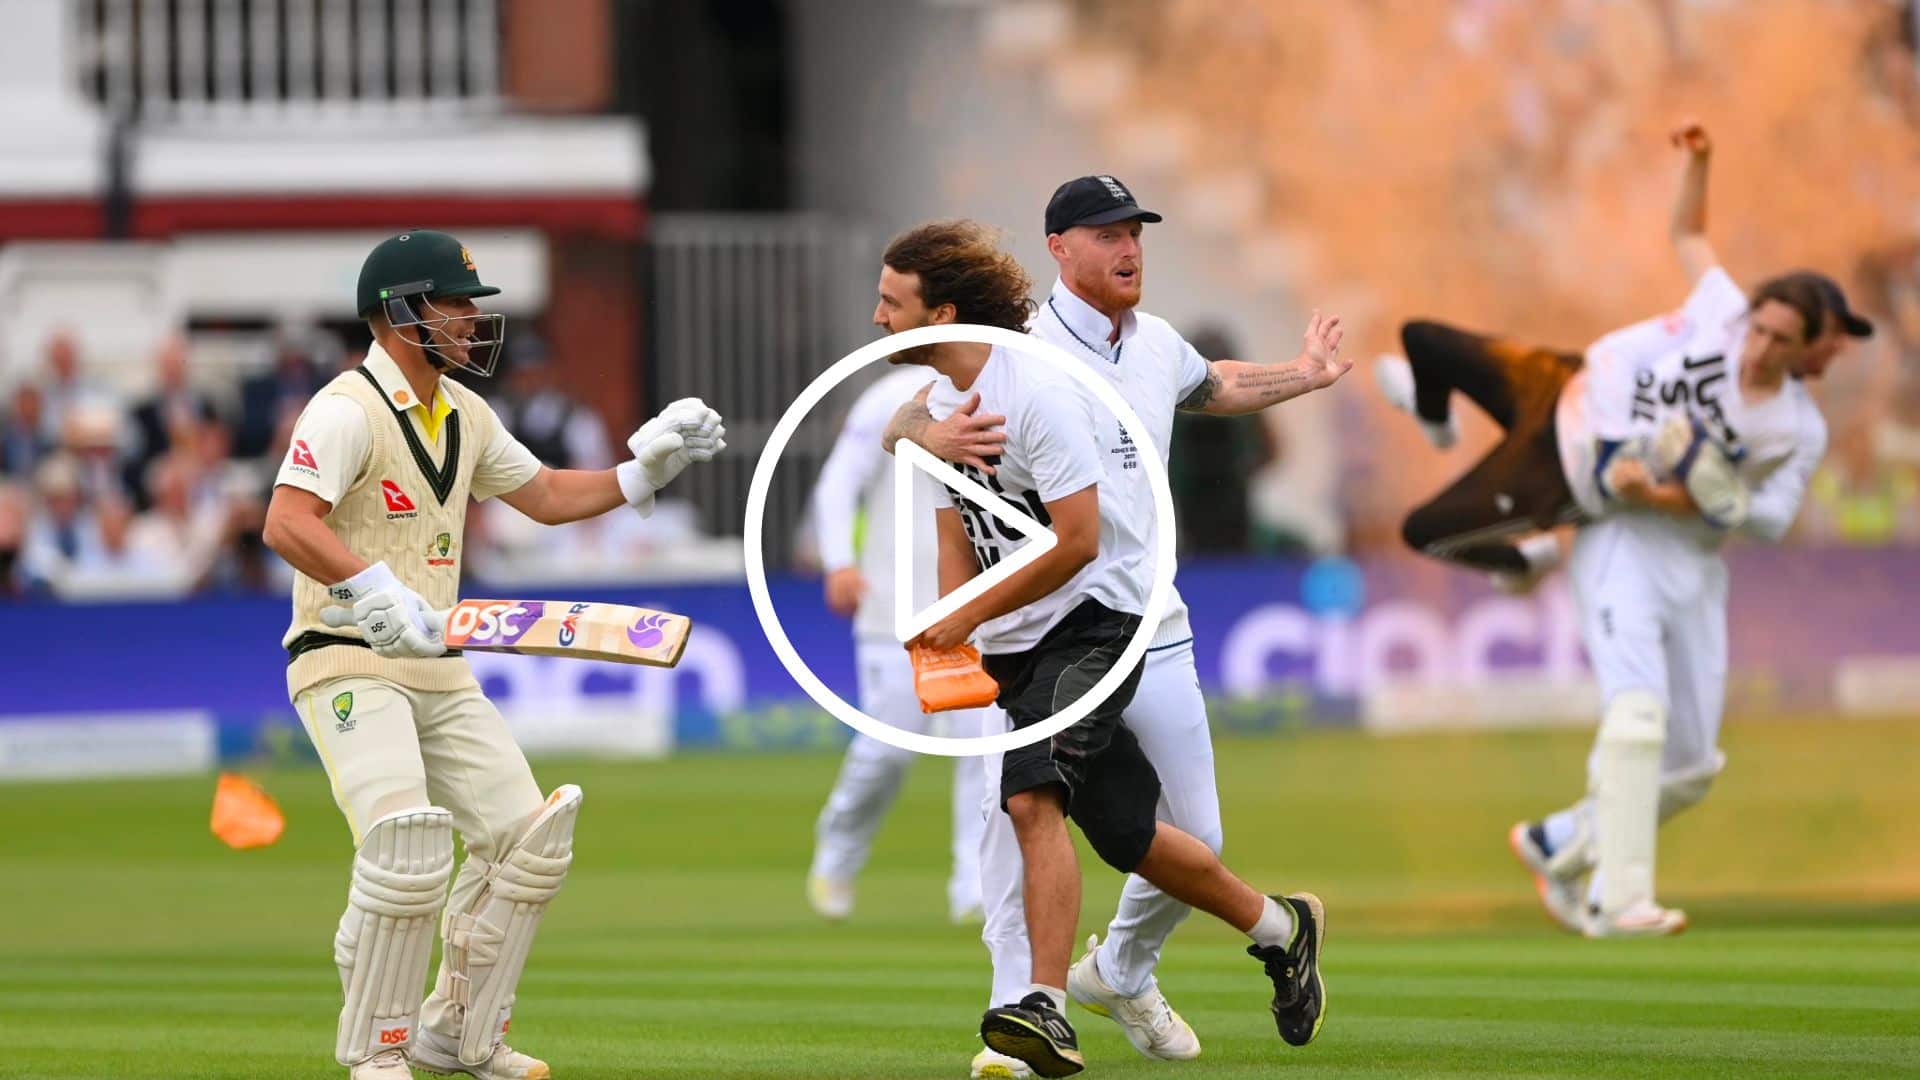 [Watch] Amusing Scenes at Lord's as Oil Protestor Gets Taken off Field by Jonny Bairstow